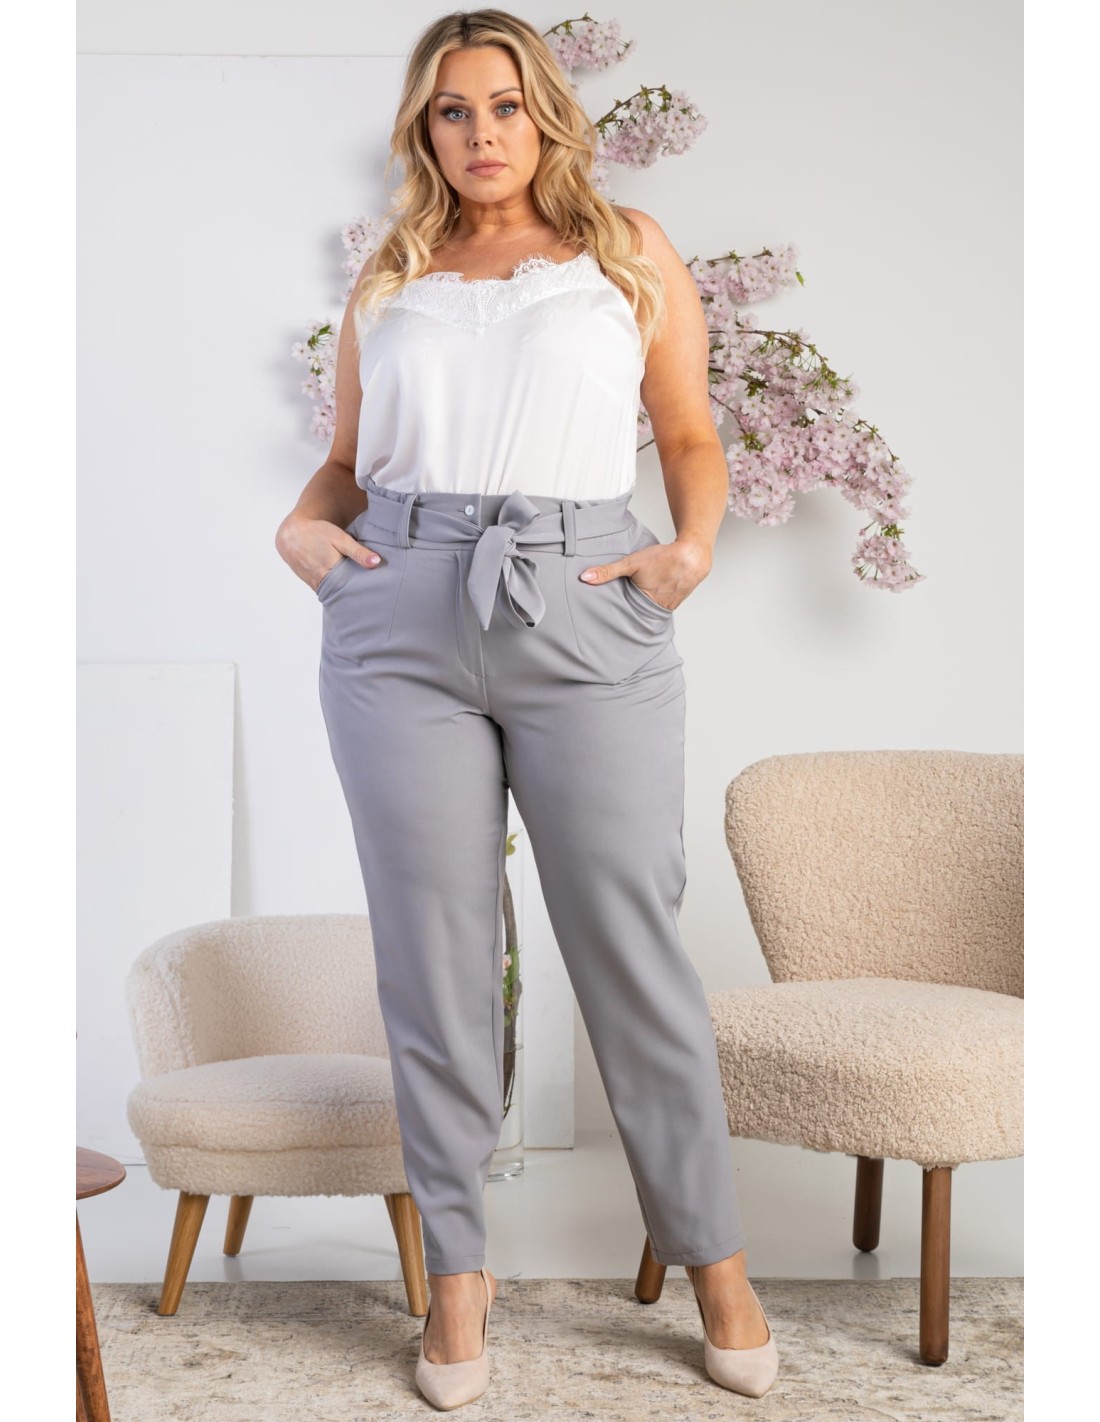 The Best Paperbag Pants In Plus Size - Stylish Curves | Paperbag waist  trousers, Plus size pants, Plus size women